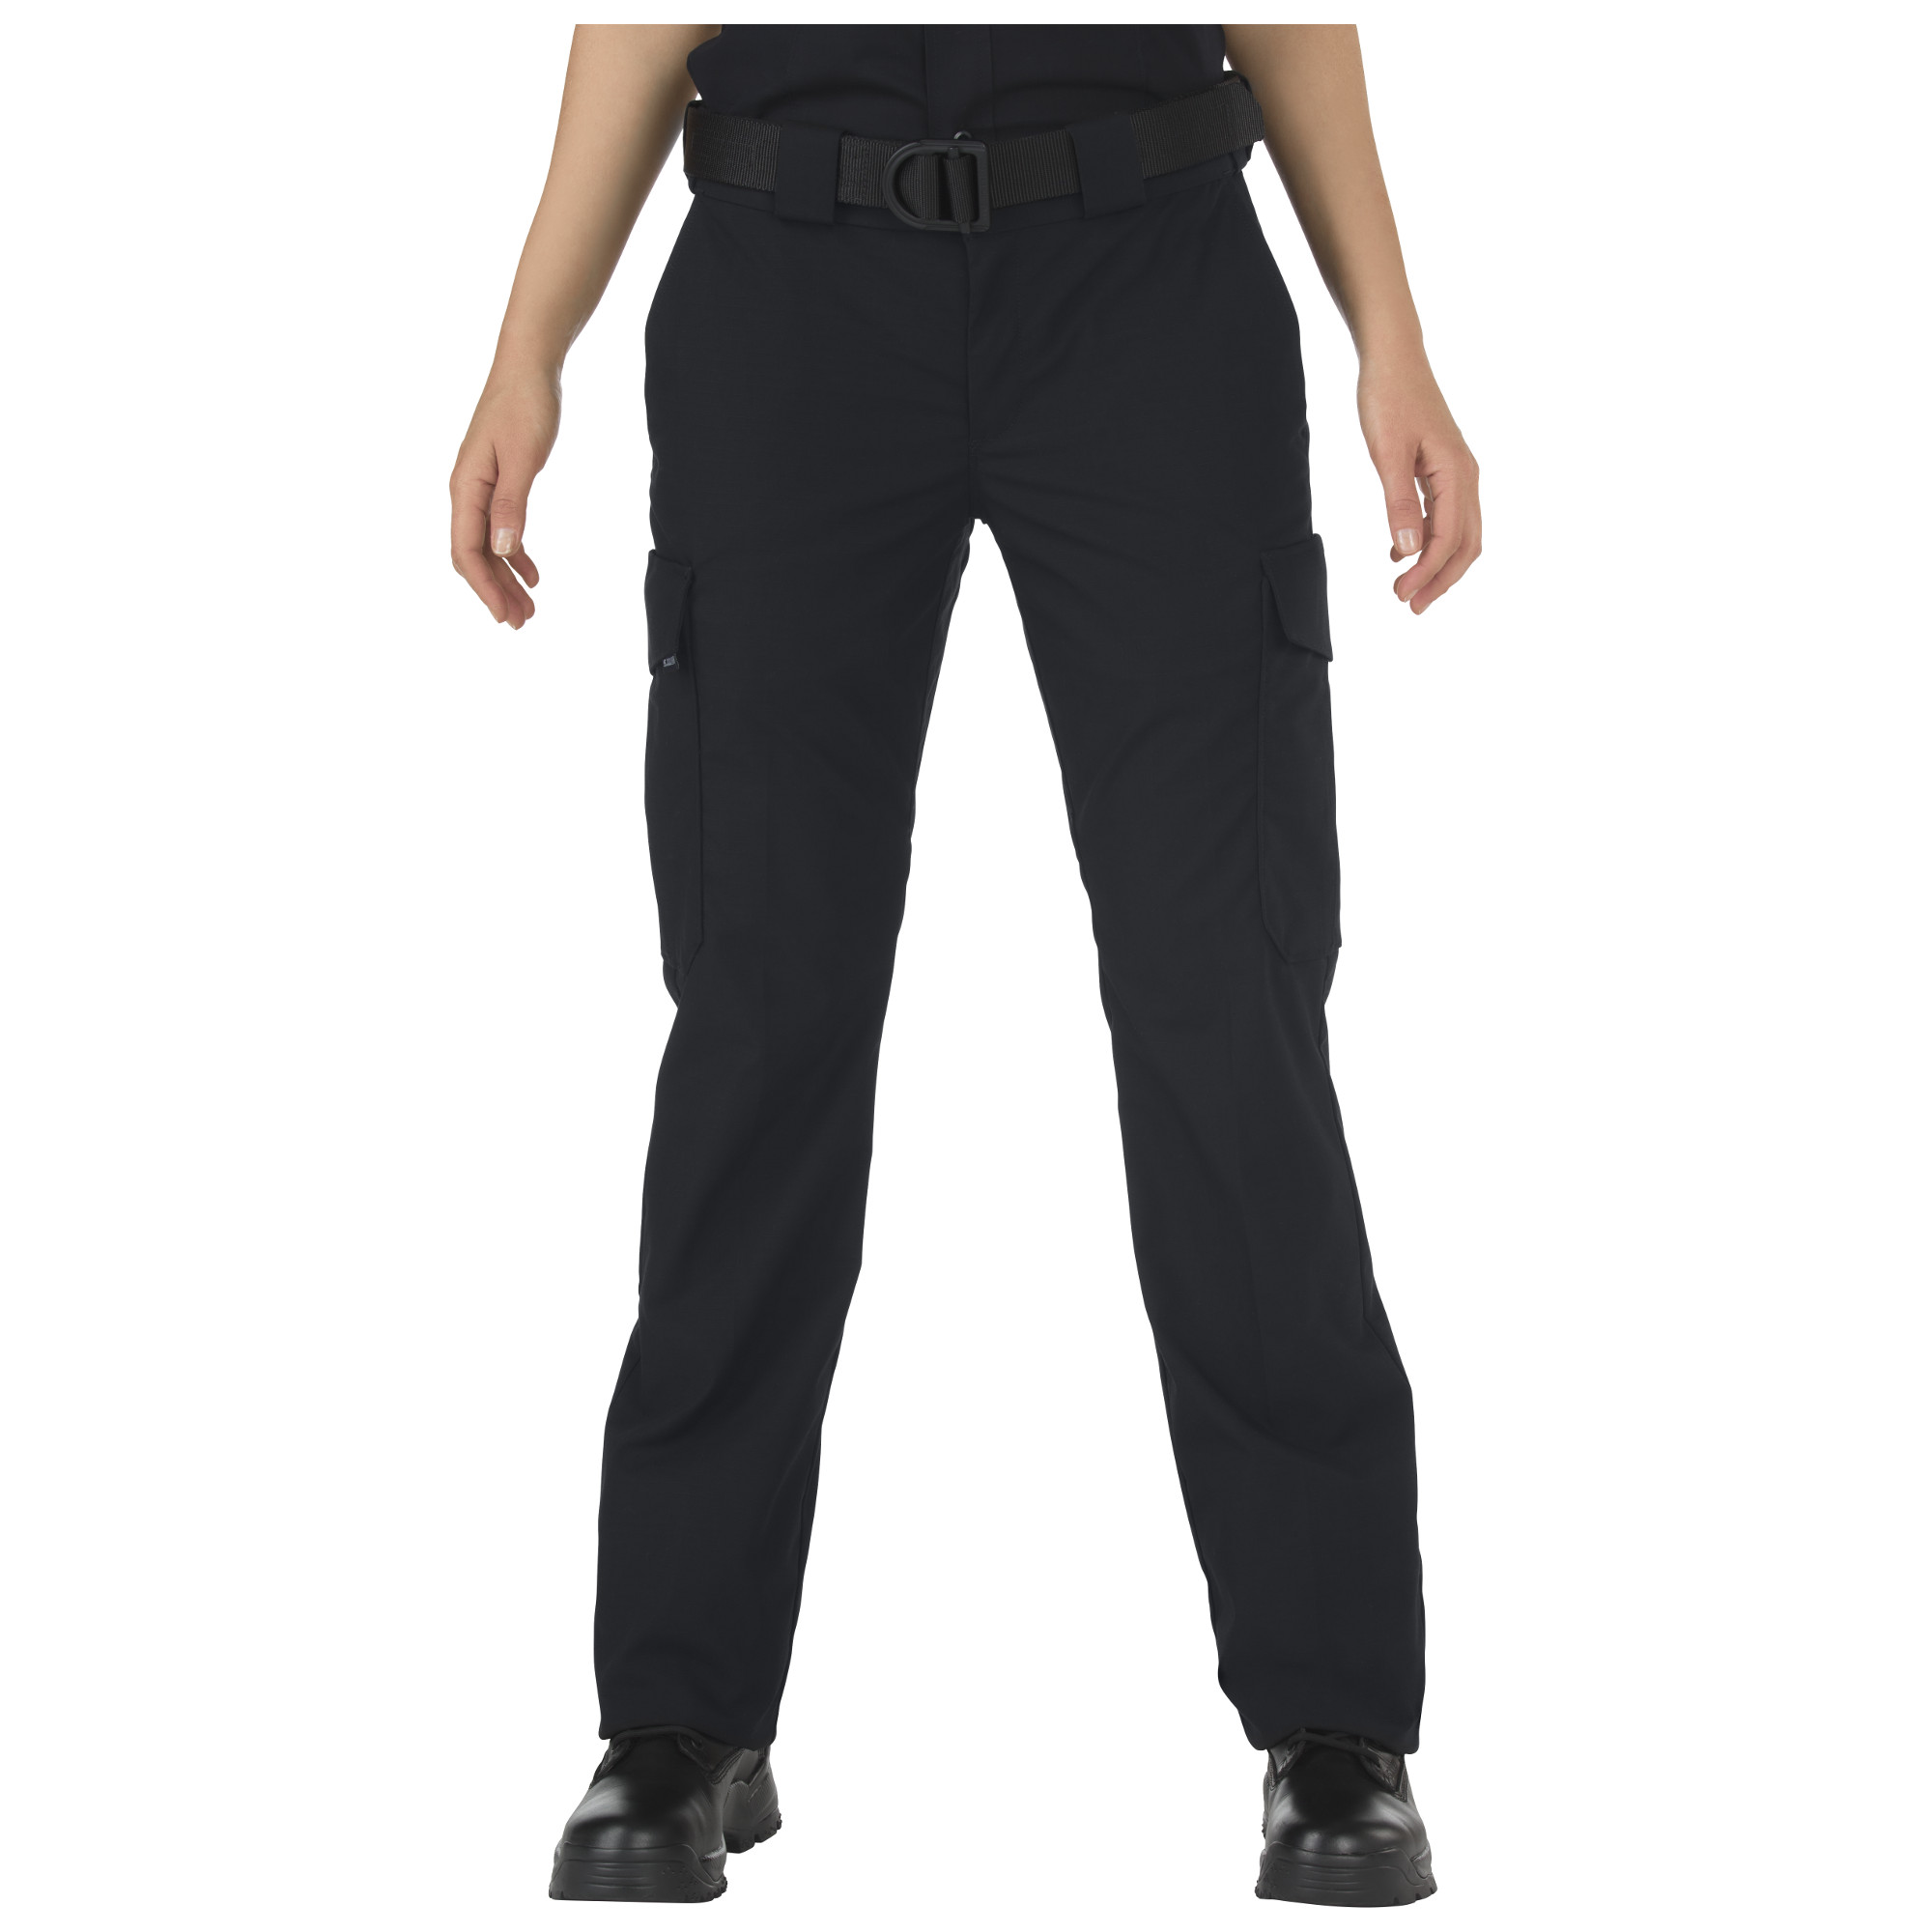 5.11 Strykeâ ¢ Class-B Pdu Cargo Pant From 5.11 Tactical-5.11 Tactical